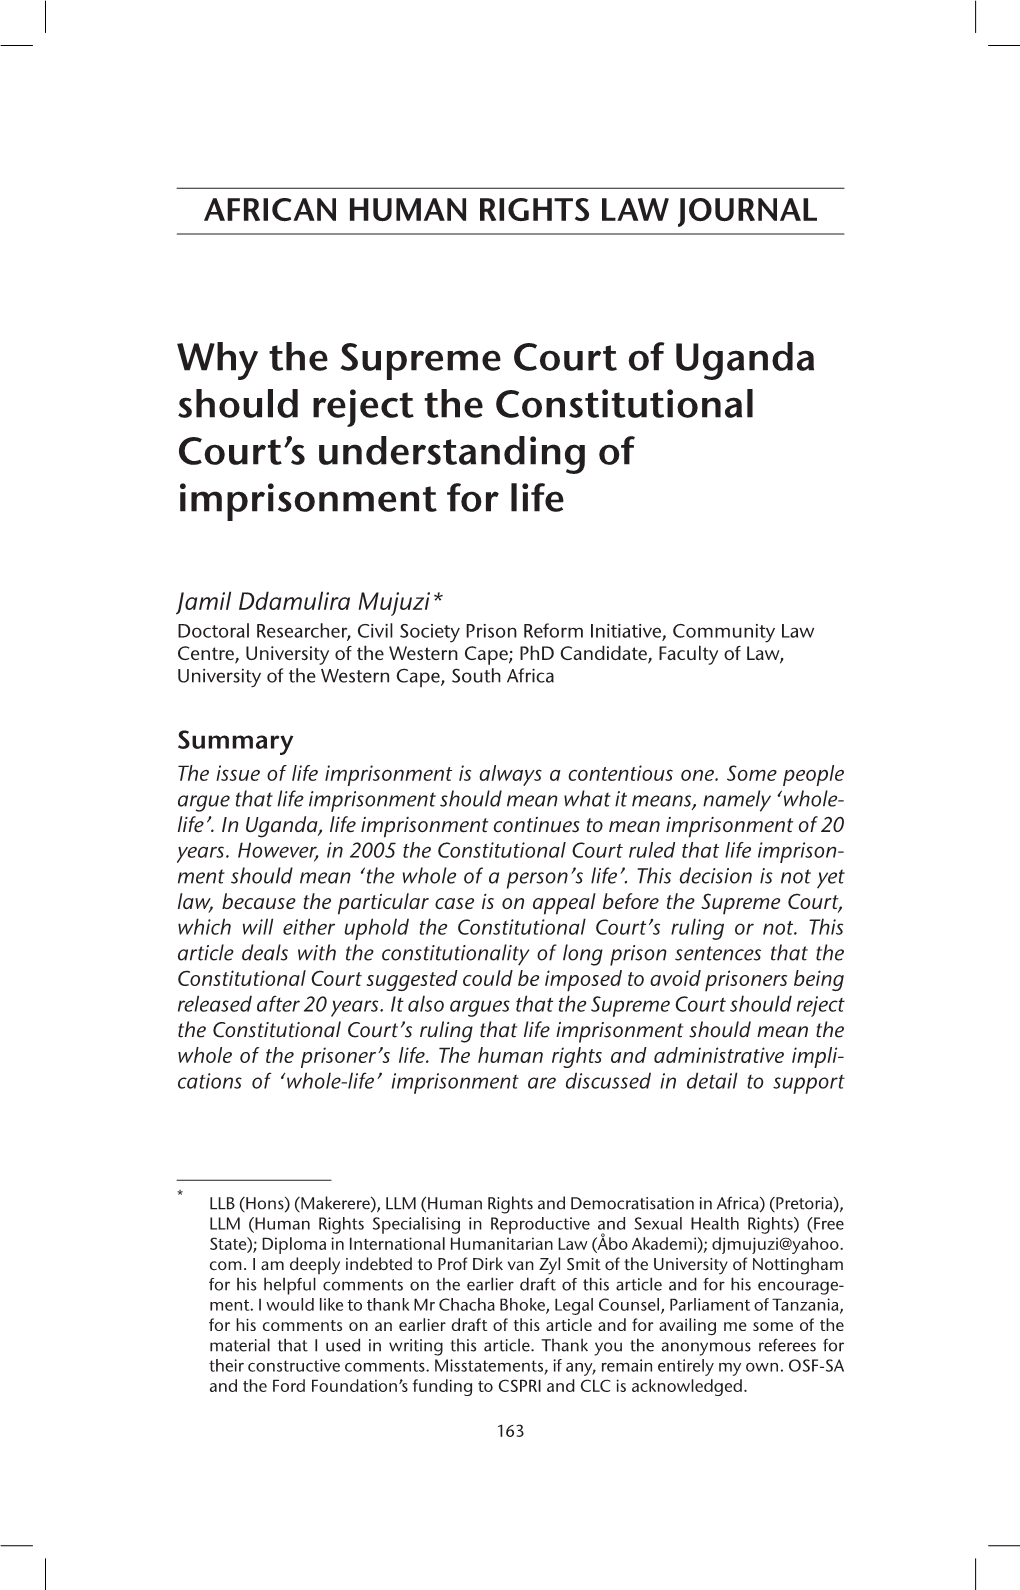 Why the Supreme Court of Uganda Should Reject the Constitutional Court’S Understanding of Imprisonment for Life